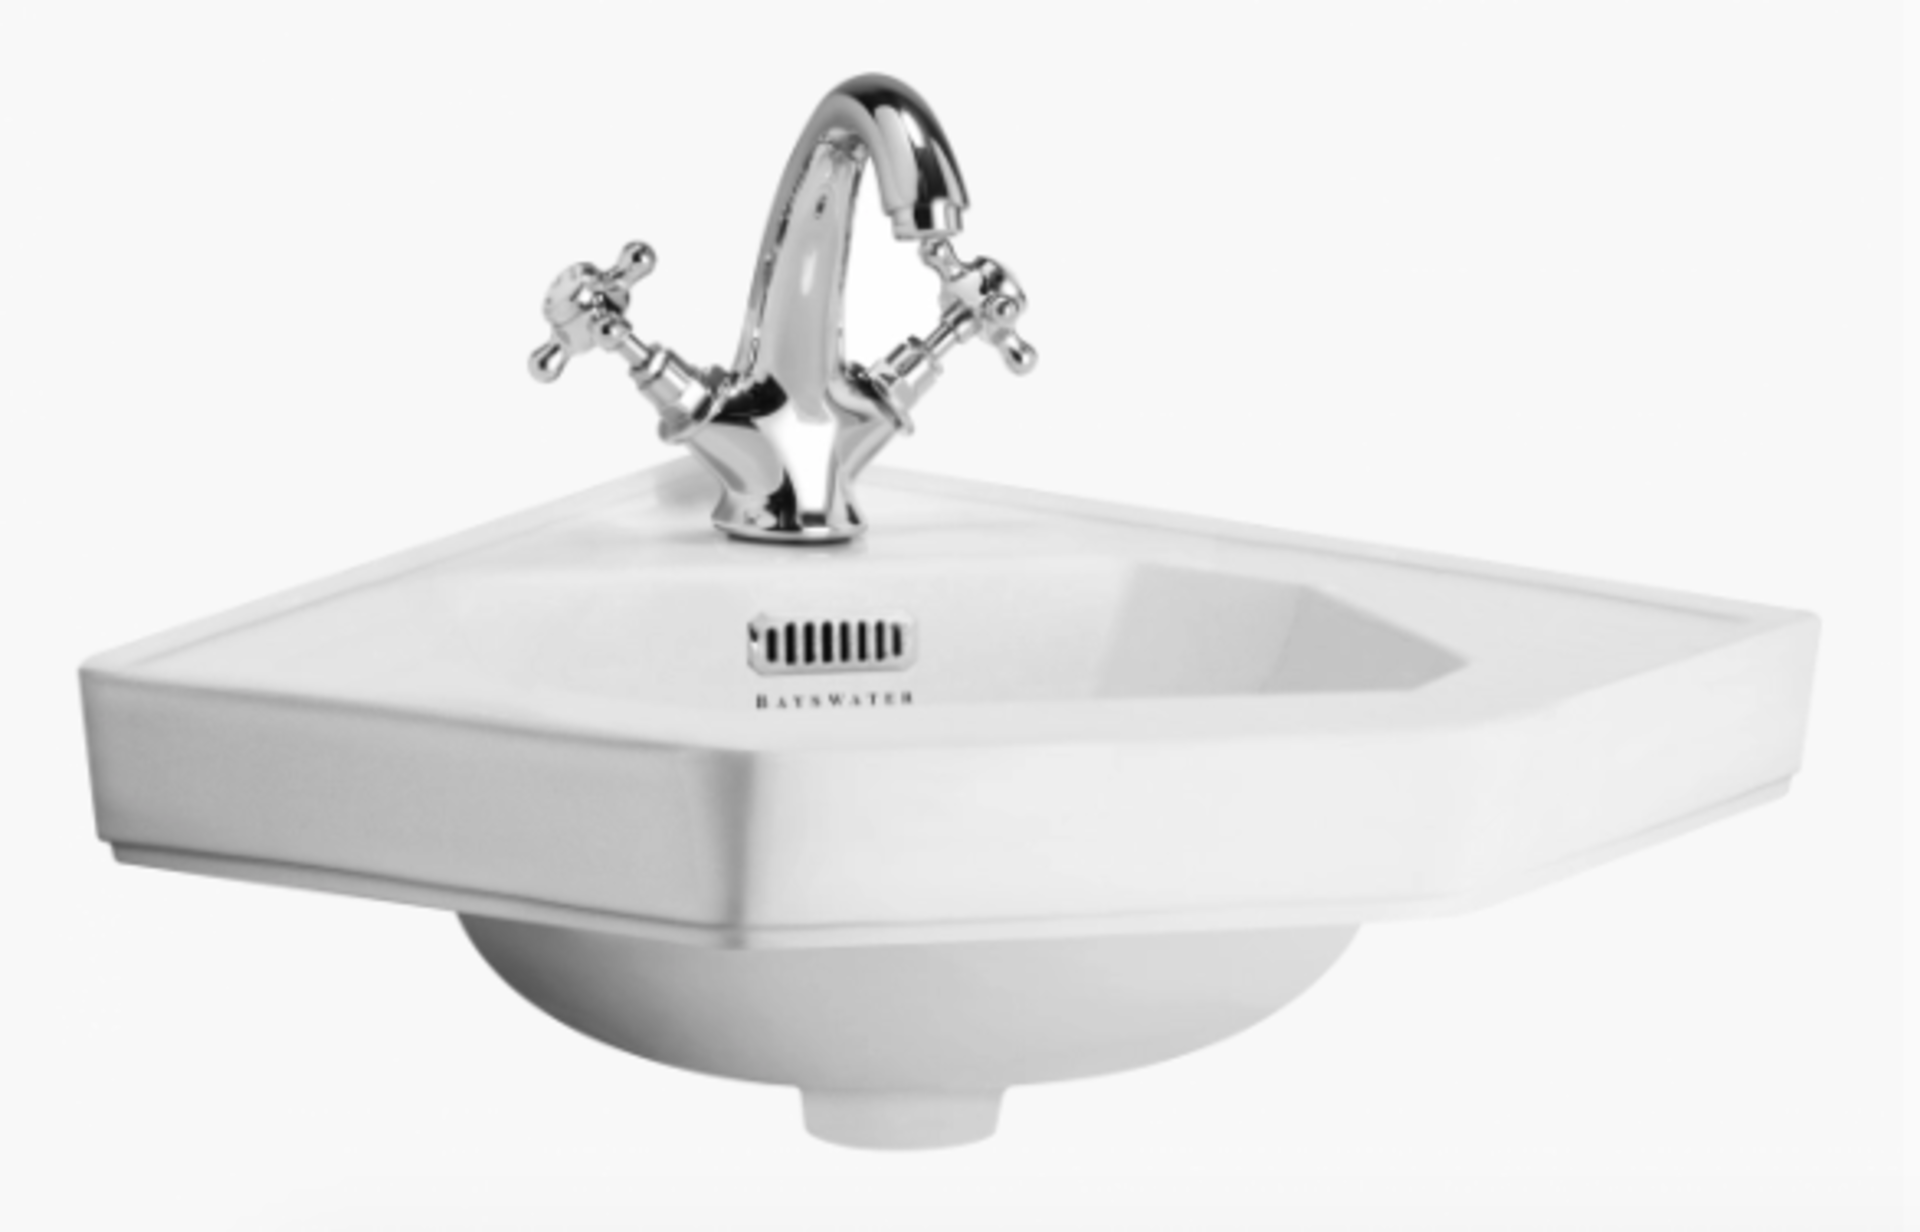 Bayswater 'Fitzroy' Traditional Style Ceramic Corner Wash Basin in White. RRP £145 - Brand New - Image 7 of 7